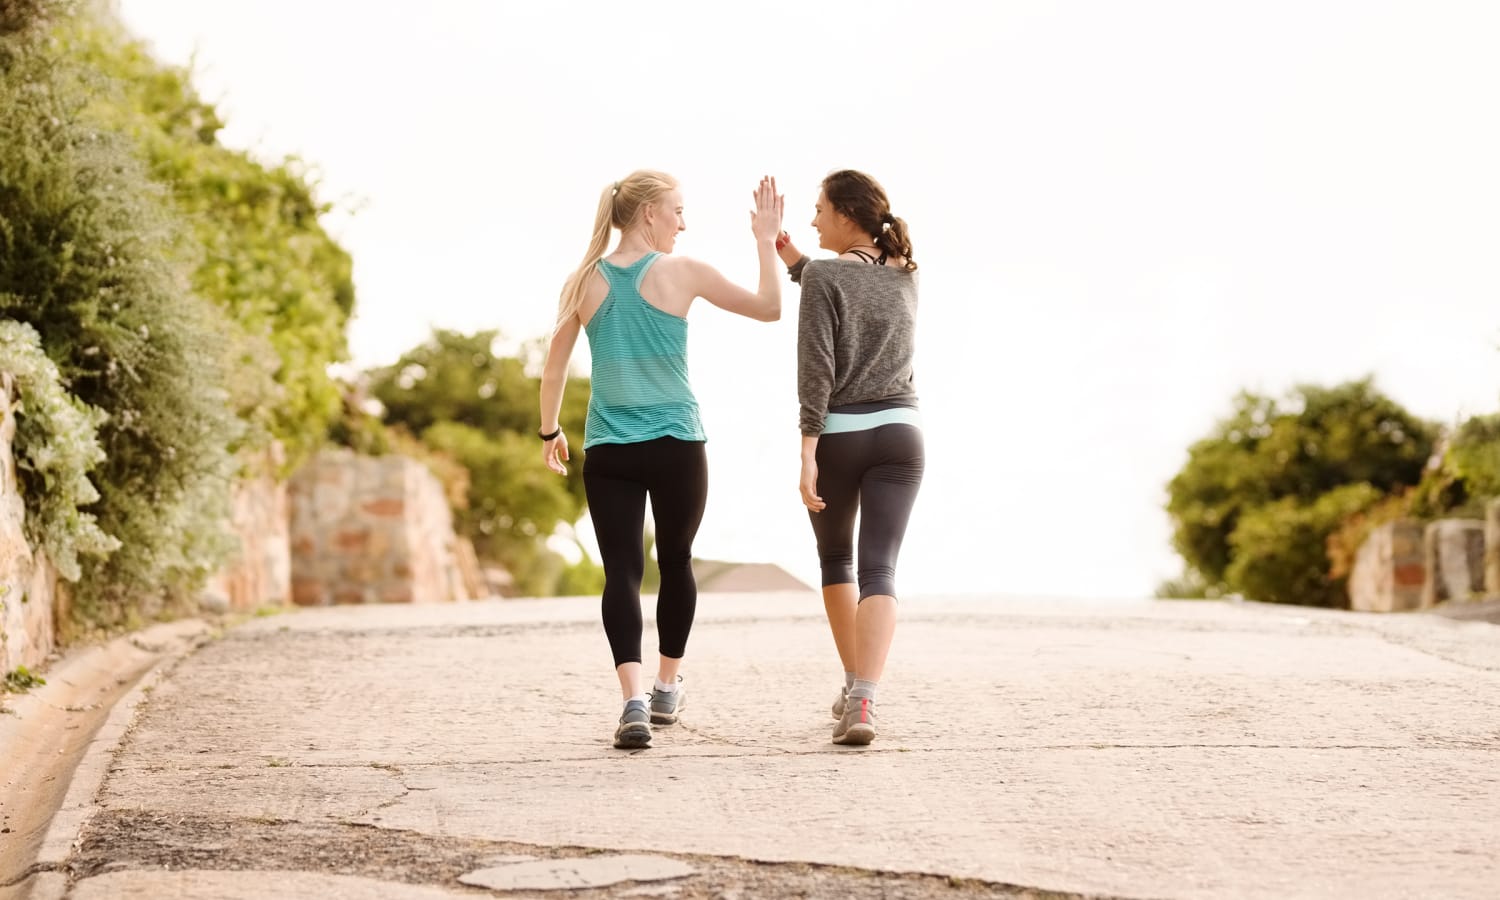 Reap the Benefits of Walking with These 7 Workouts